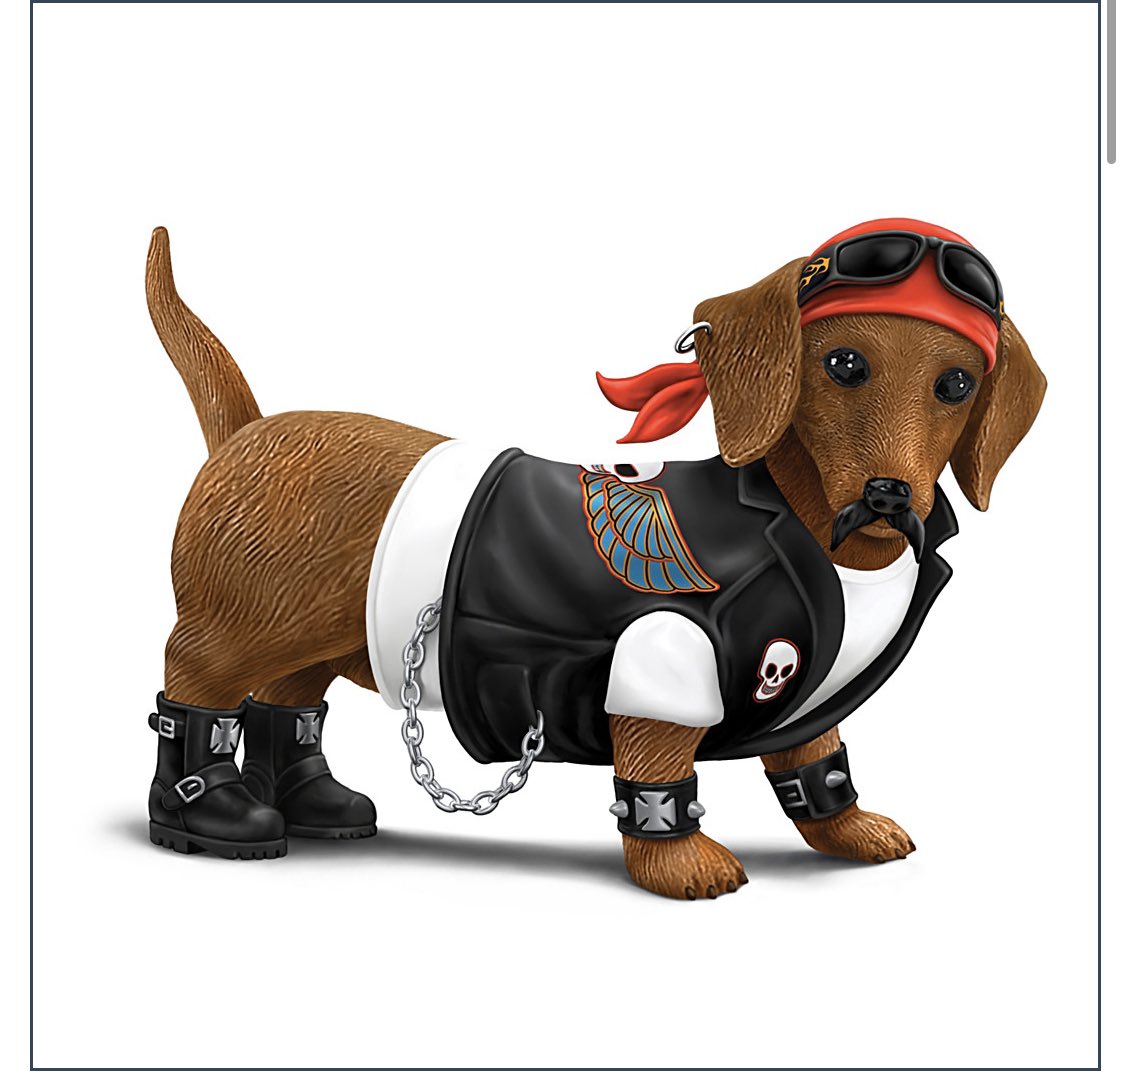 This is "Cruiser" the Dachshund Biker Figurine. These are the promo images they have on the website. I will say this, I like Cruiser and would proudly display him in my home.